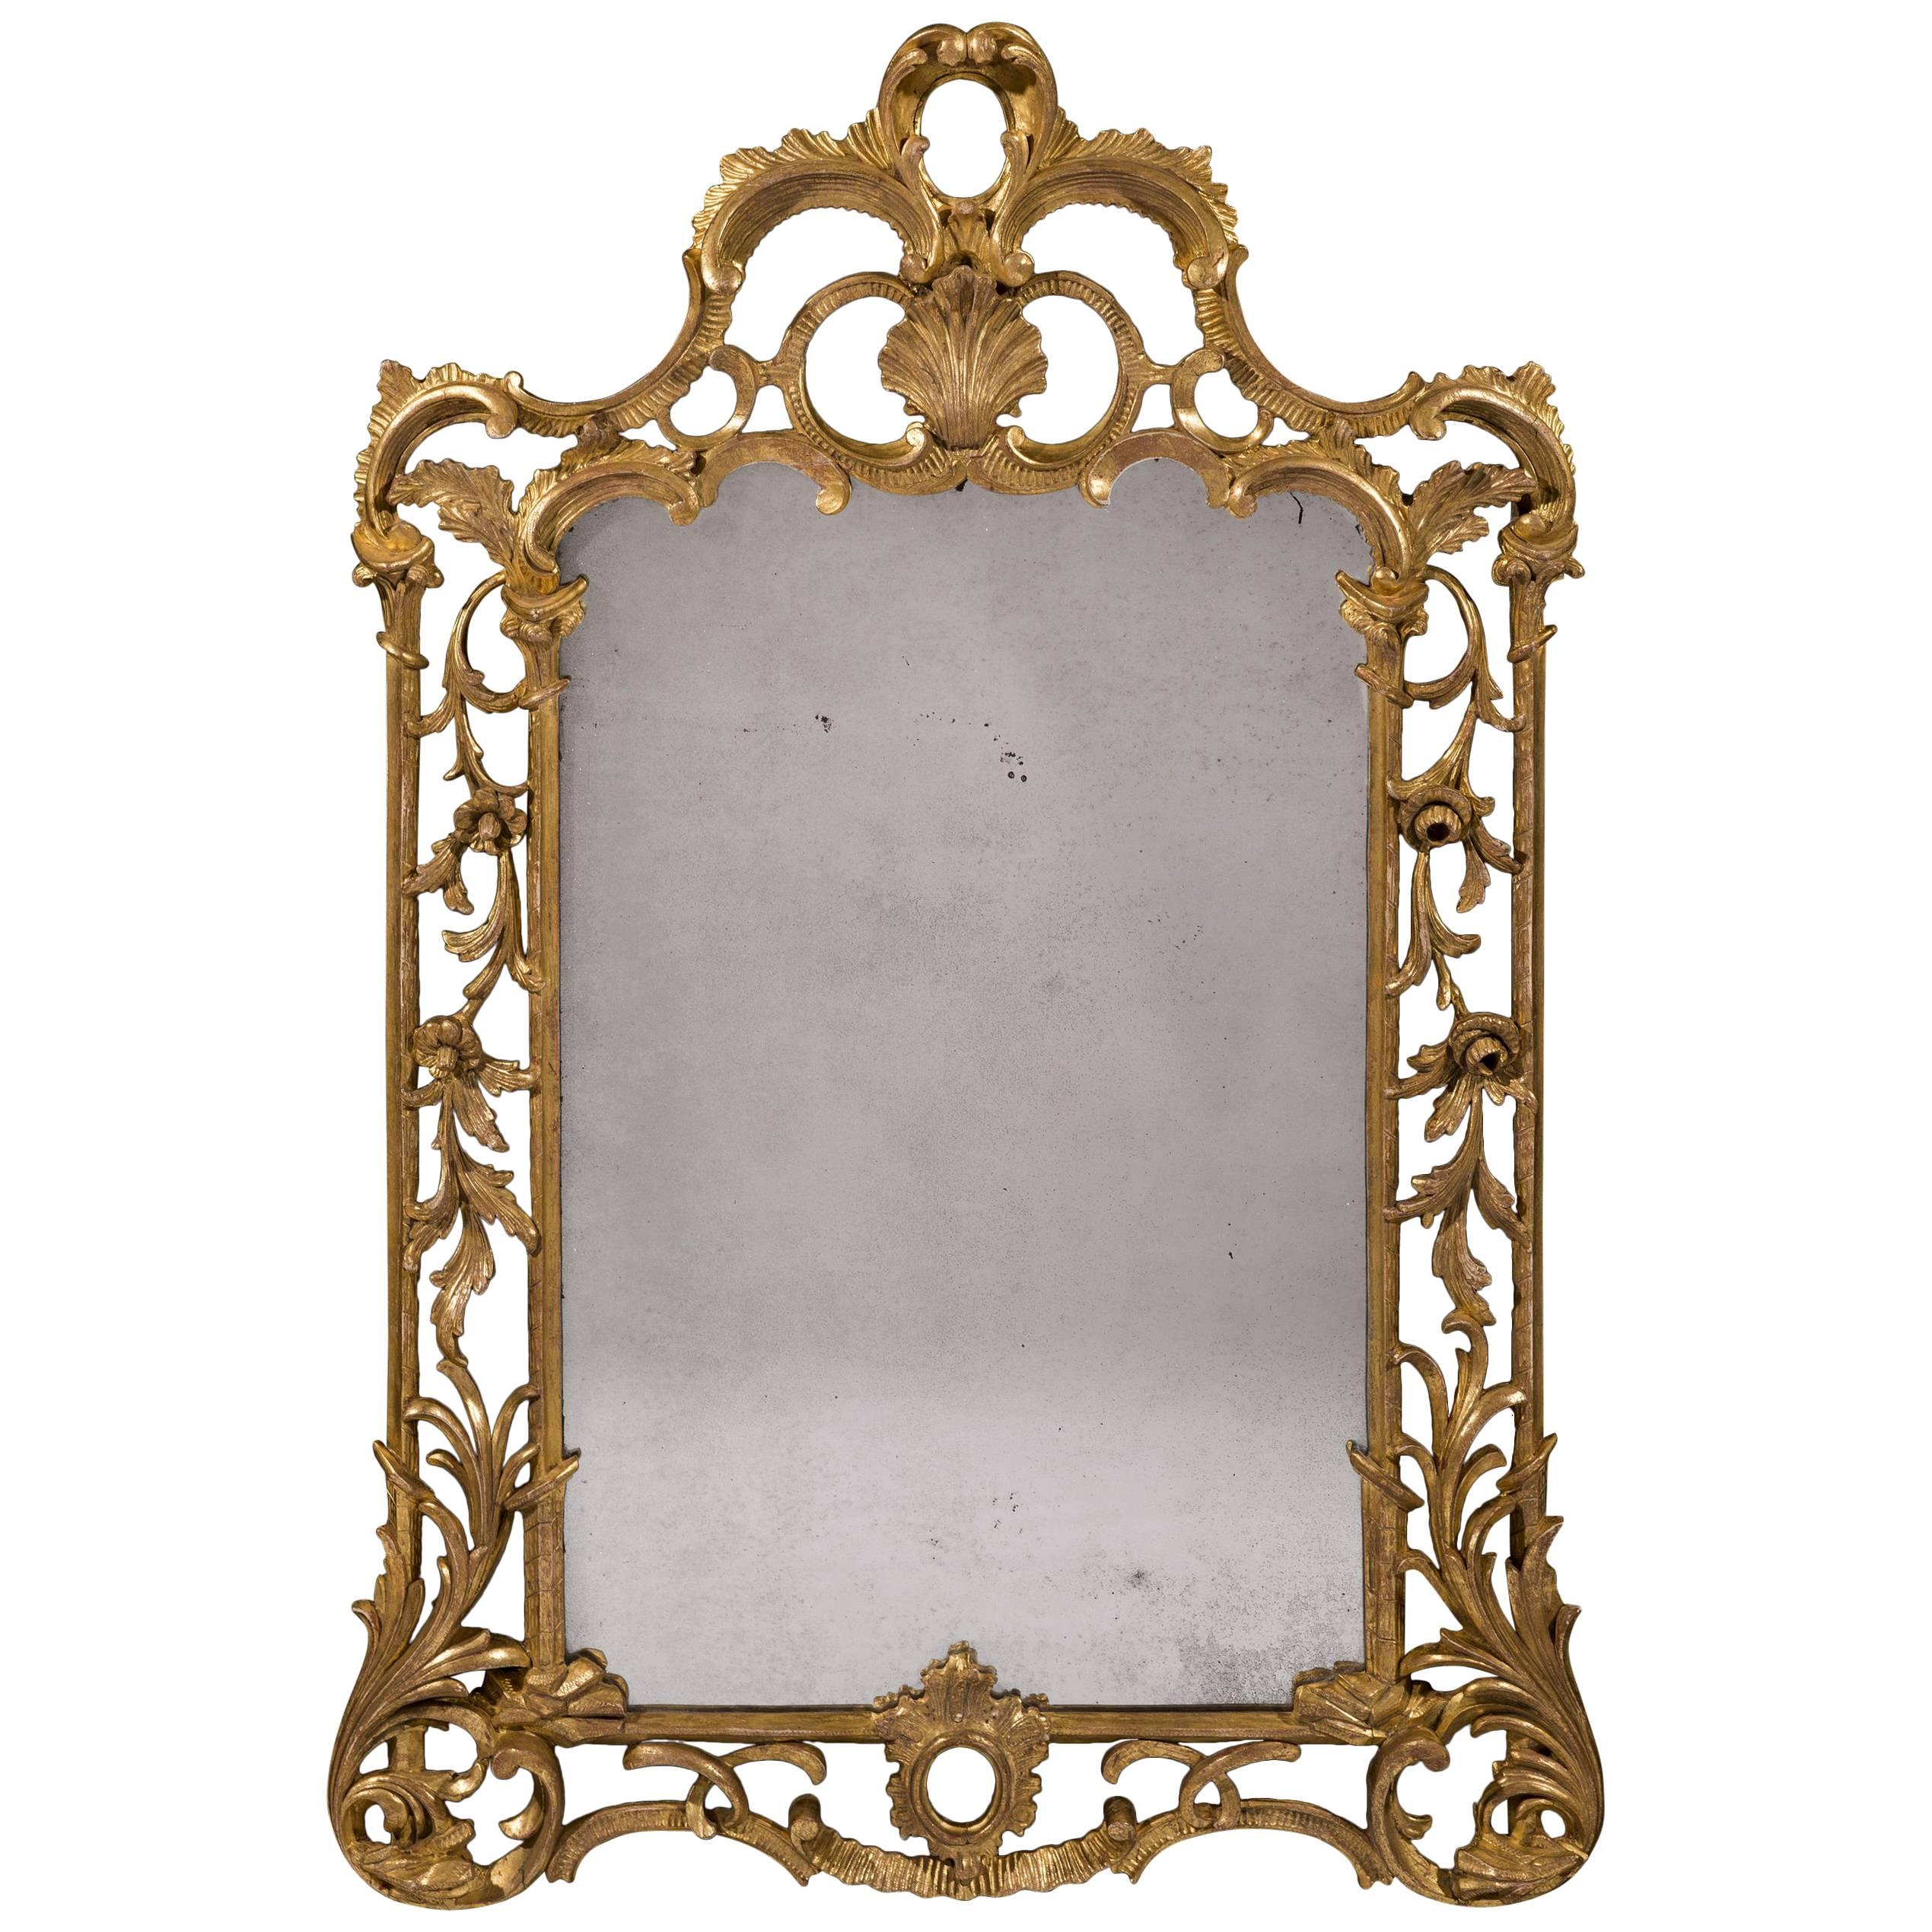 George III Period 18th Century Carved Giltwood and Gesso Mirror